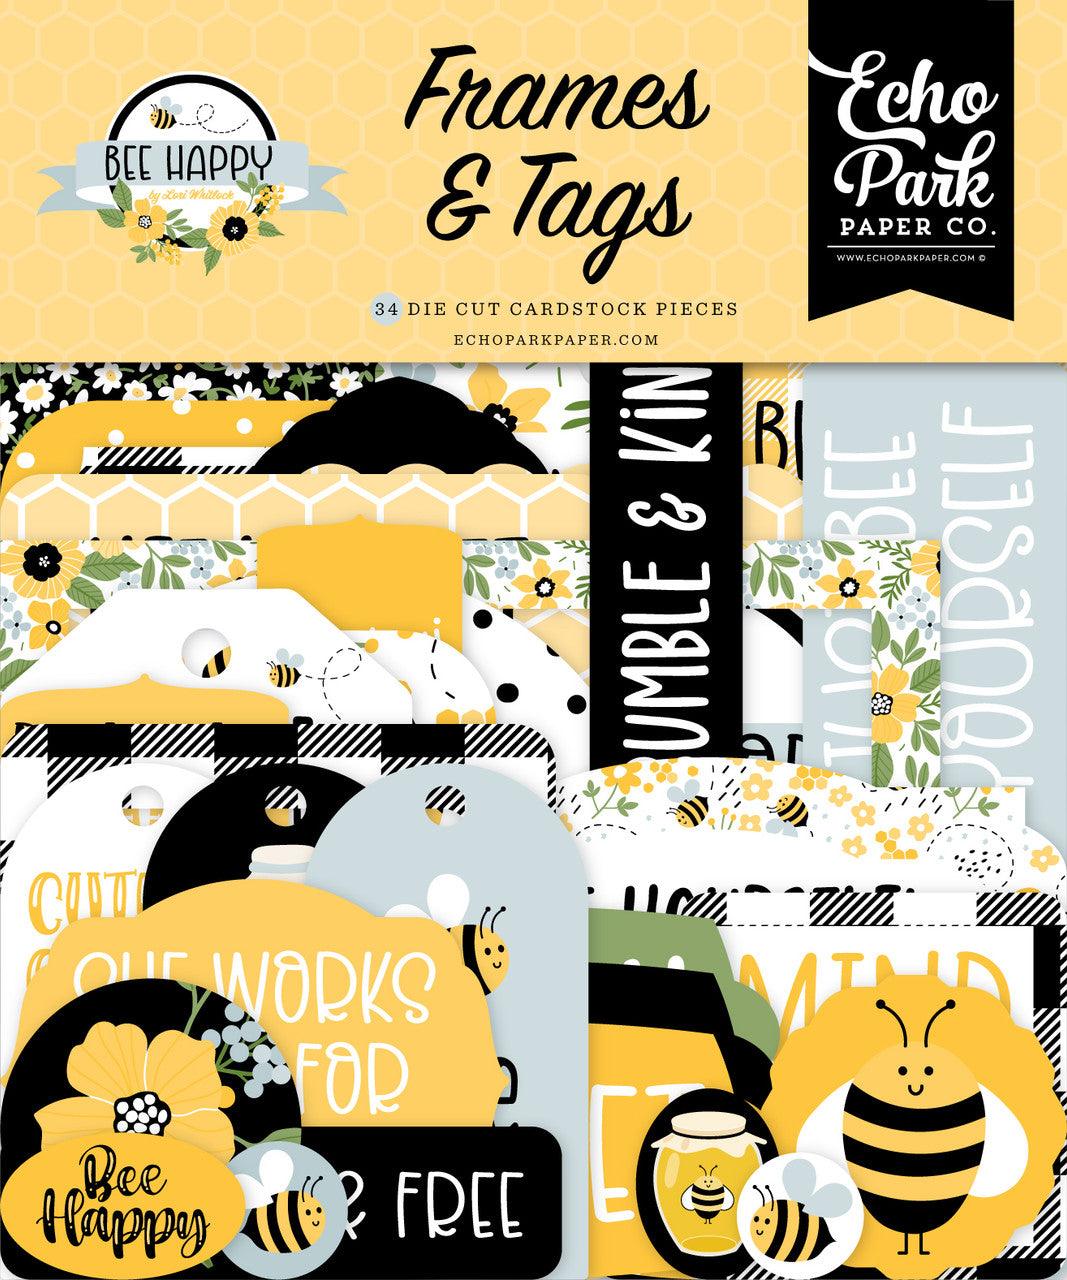 Bee Happy Collection 5 x 5 Scrapbook Tags & Frames Die Cuts by Echo Park Paper - Scrapbook Supply Companies